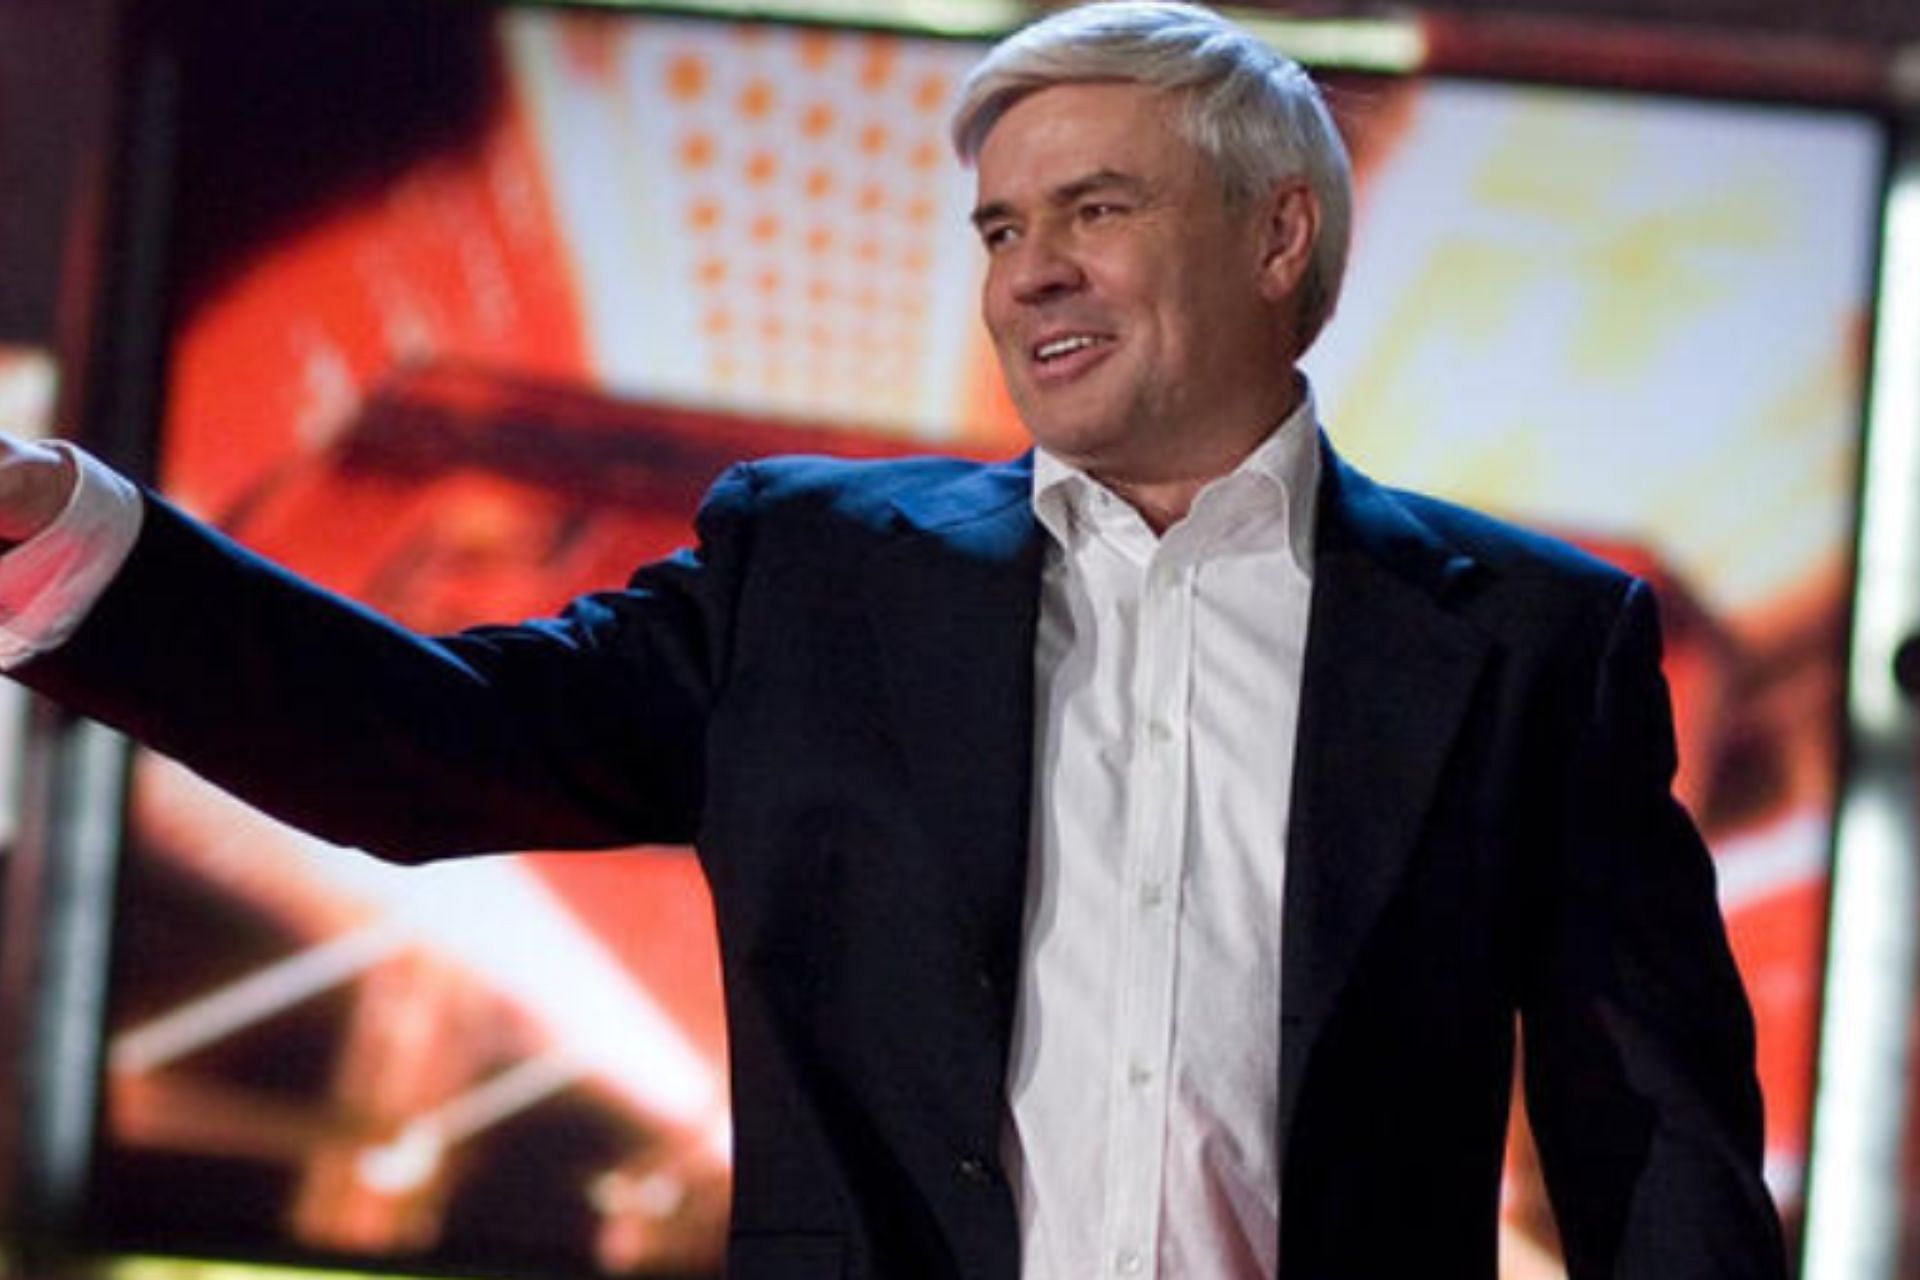 Eric Bischoff has his ideas about a recent AEW signing and booking [Image Source: WWE.com]